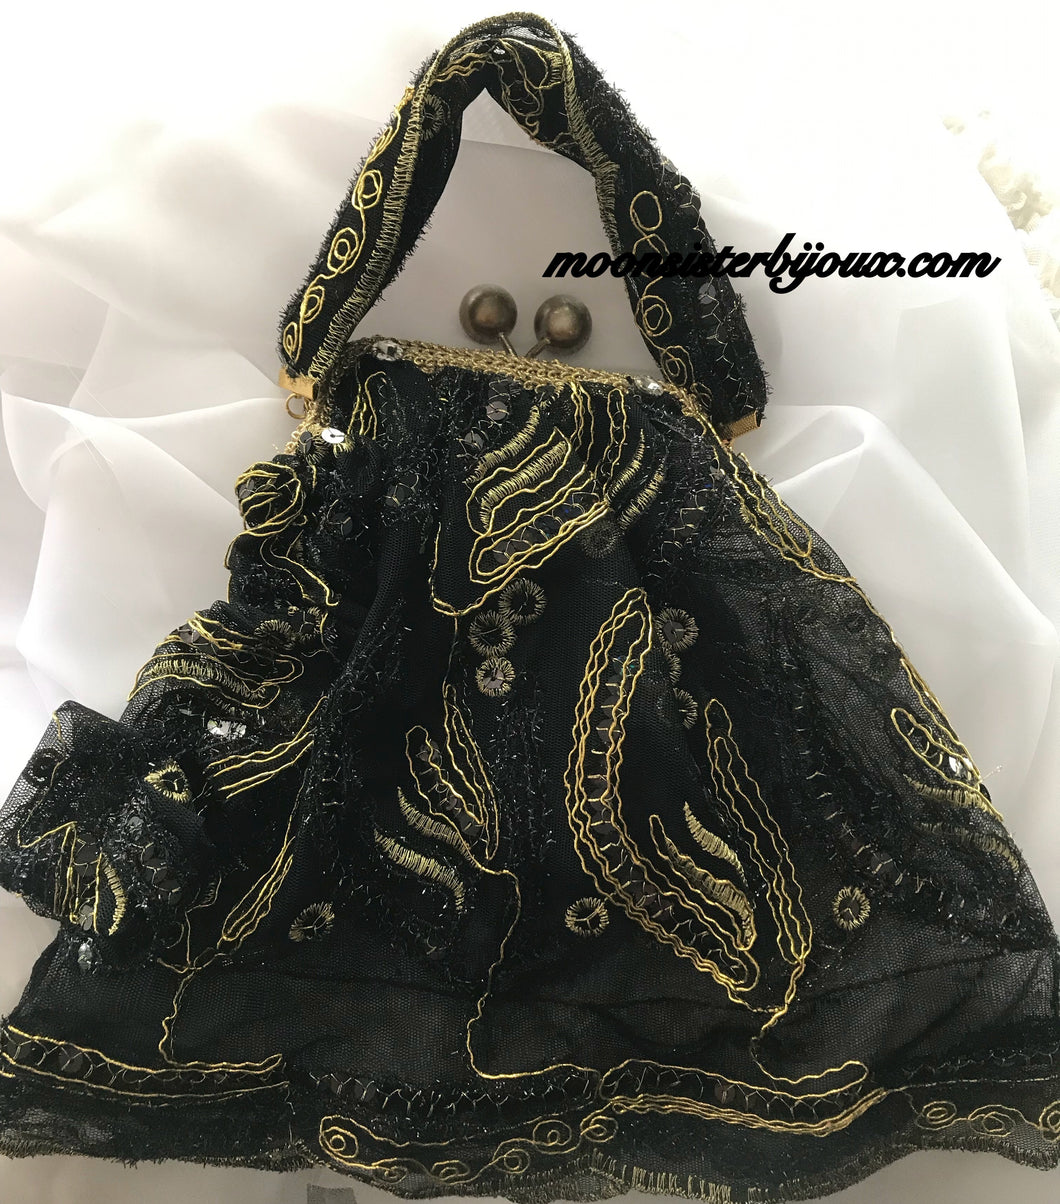 Black Purse with Raised Embroidery and Accessories